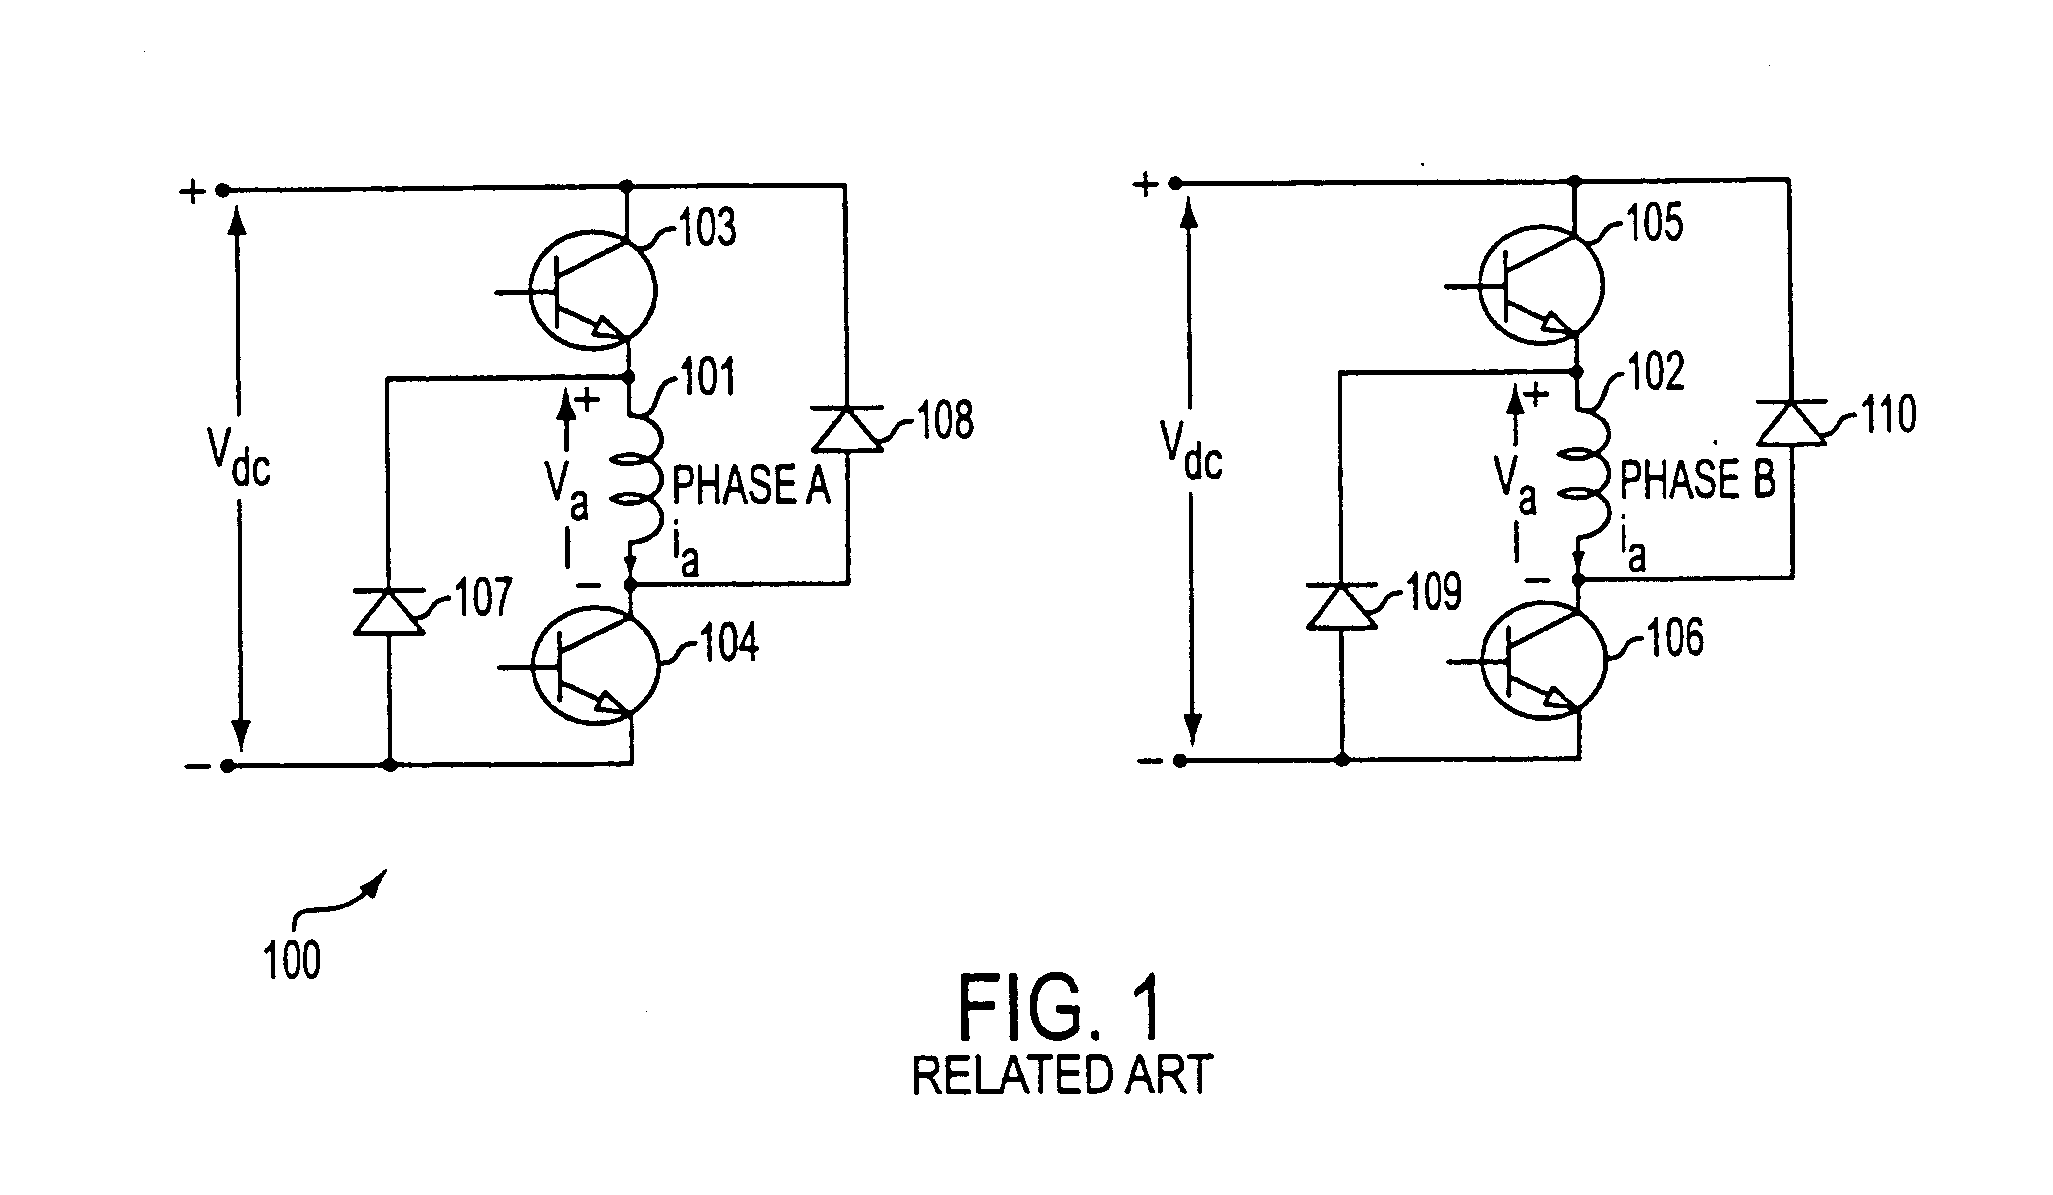 Method, apparatus, and system for drive control, power conversion, and start-up control in an SRM or PMBDCM drive system